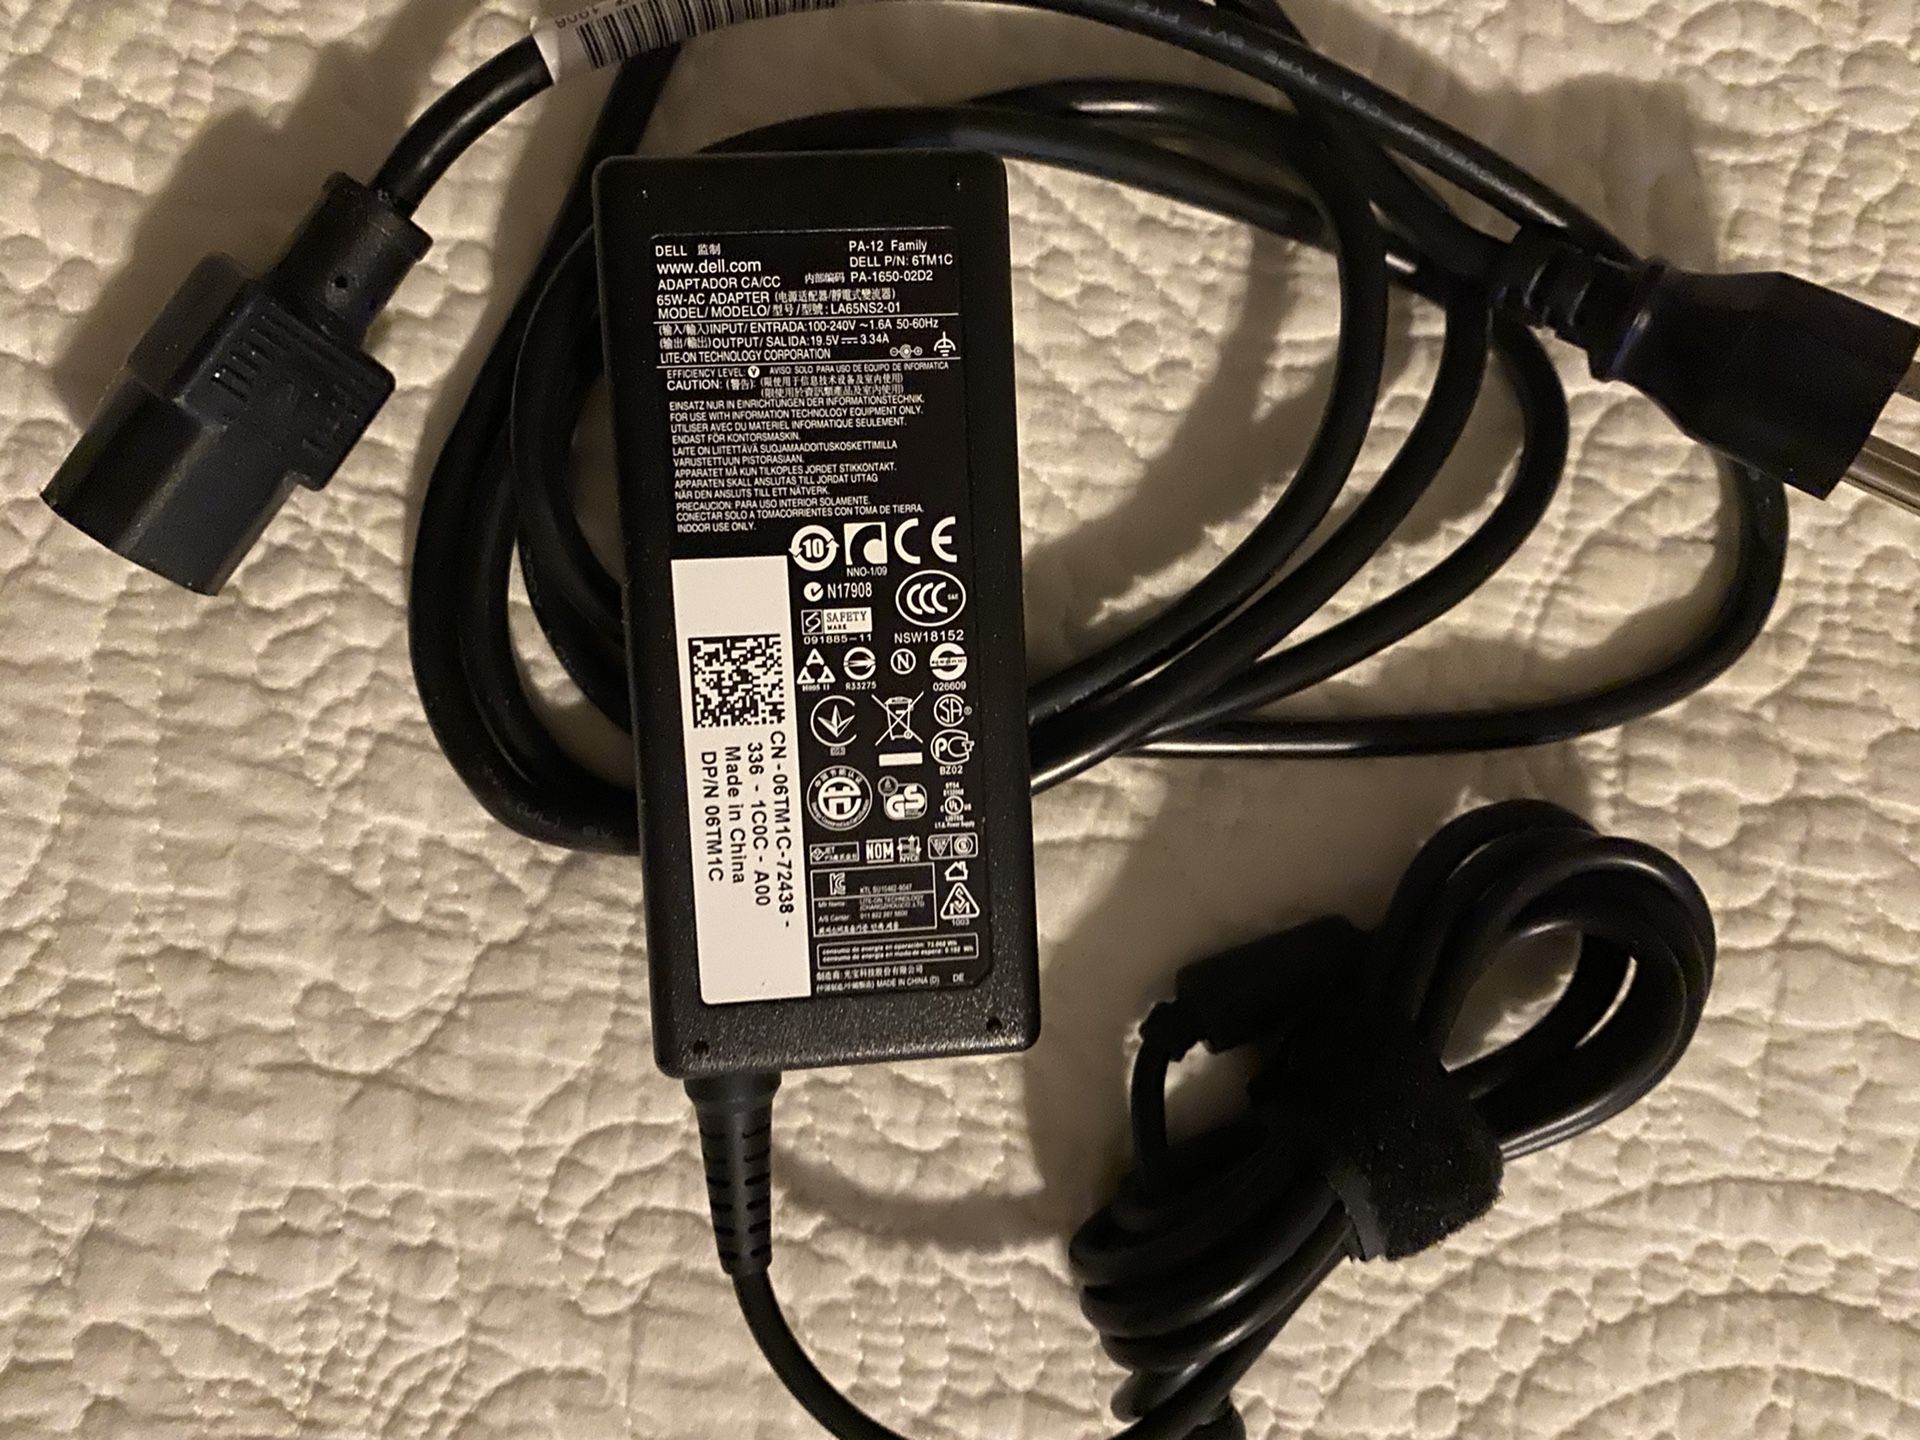 Dell Notebook Power Pack